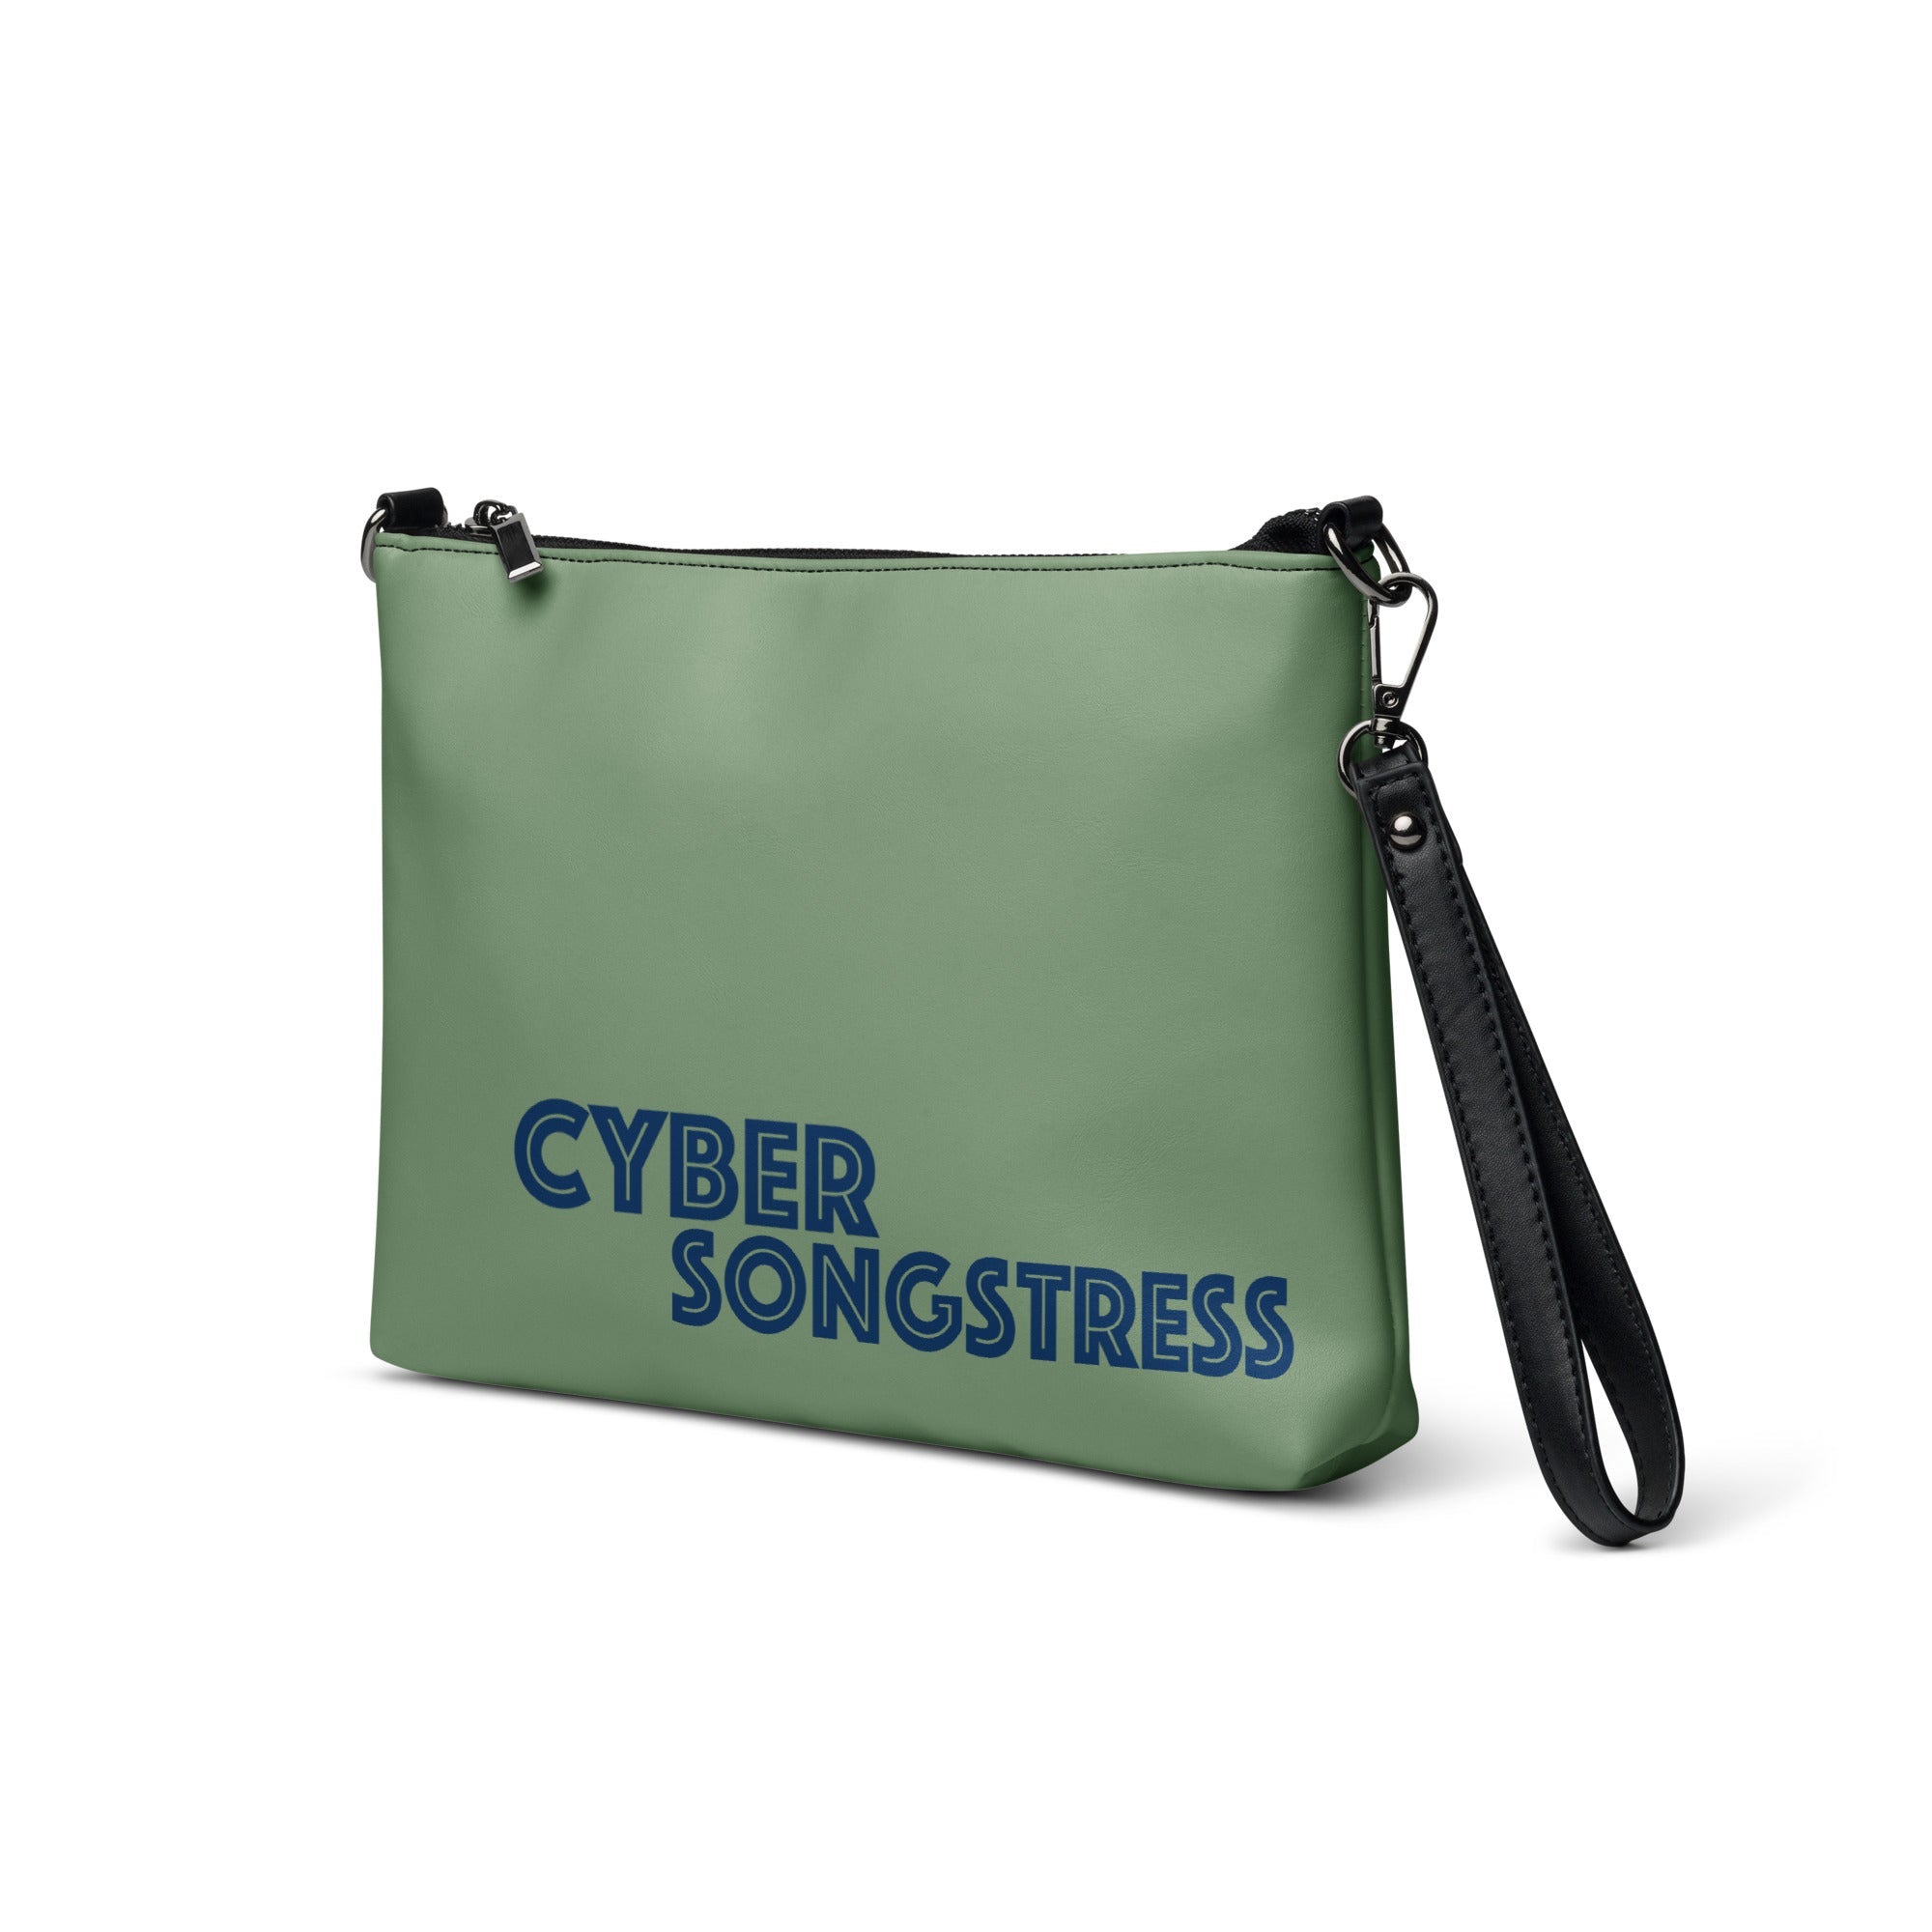 Cyber Songstress Iconic Badge Crossbody/Clutch The Groovalution